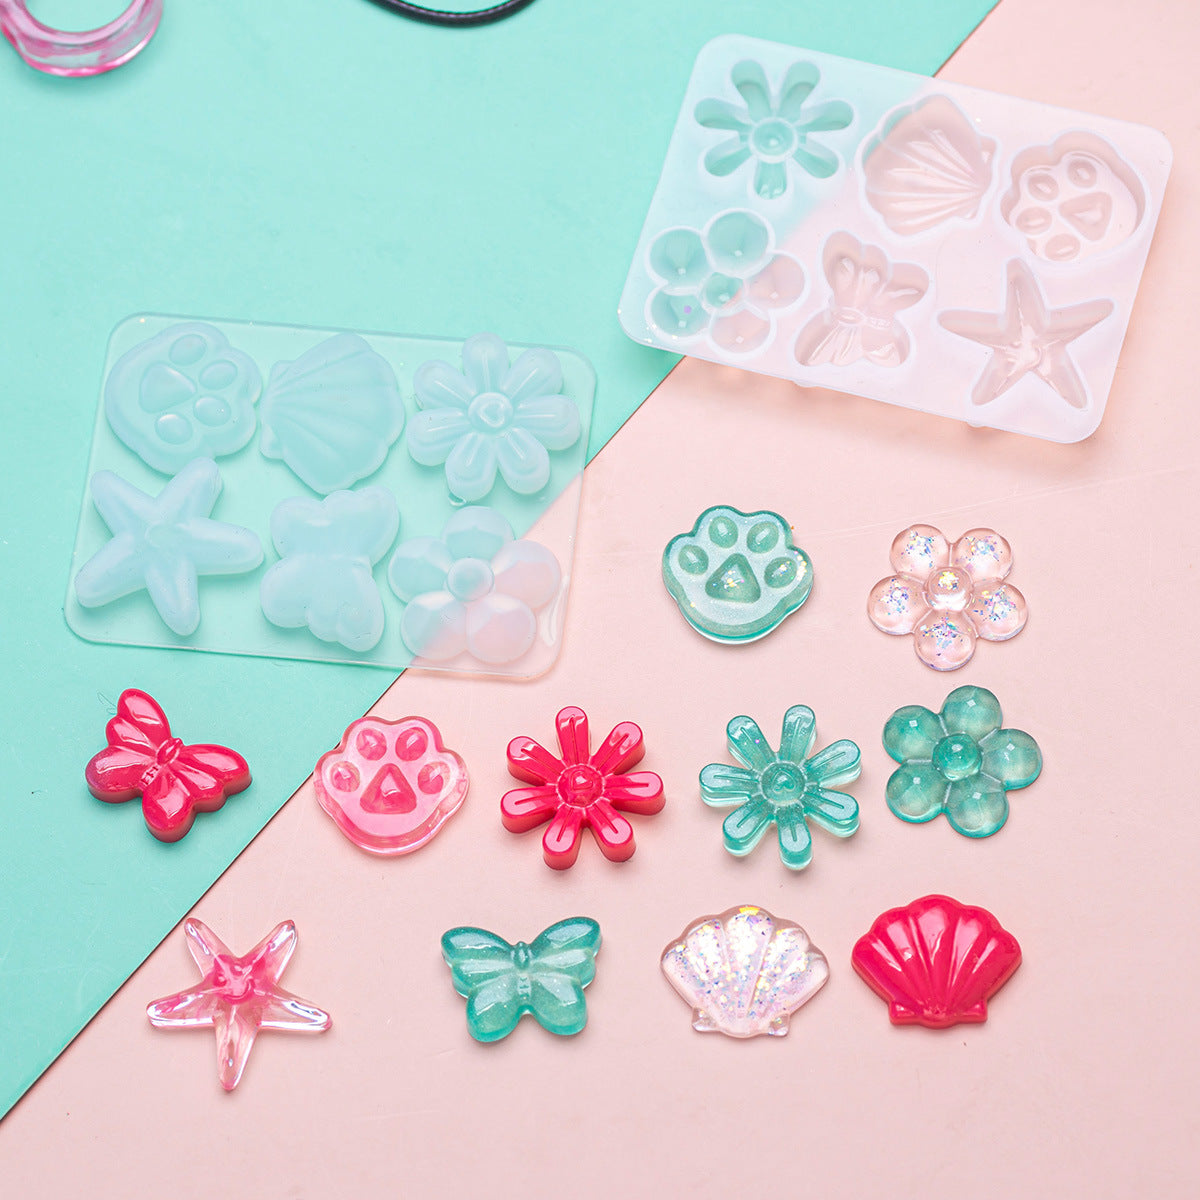 LET'S RESIN Resin Jewelry Molds,30pcs Silicone Jewelry Molds, Epoxy UV  Resin Molds Including Resin Bangle Molds, Pendant Molds, Ring Molds, and  50pcs Screw Eye Pins : Amazon.in: Home & Kitchen